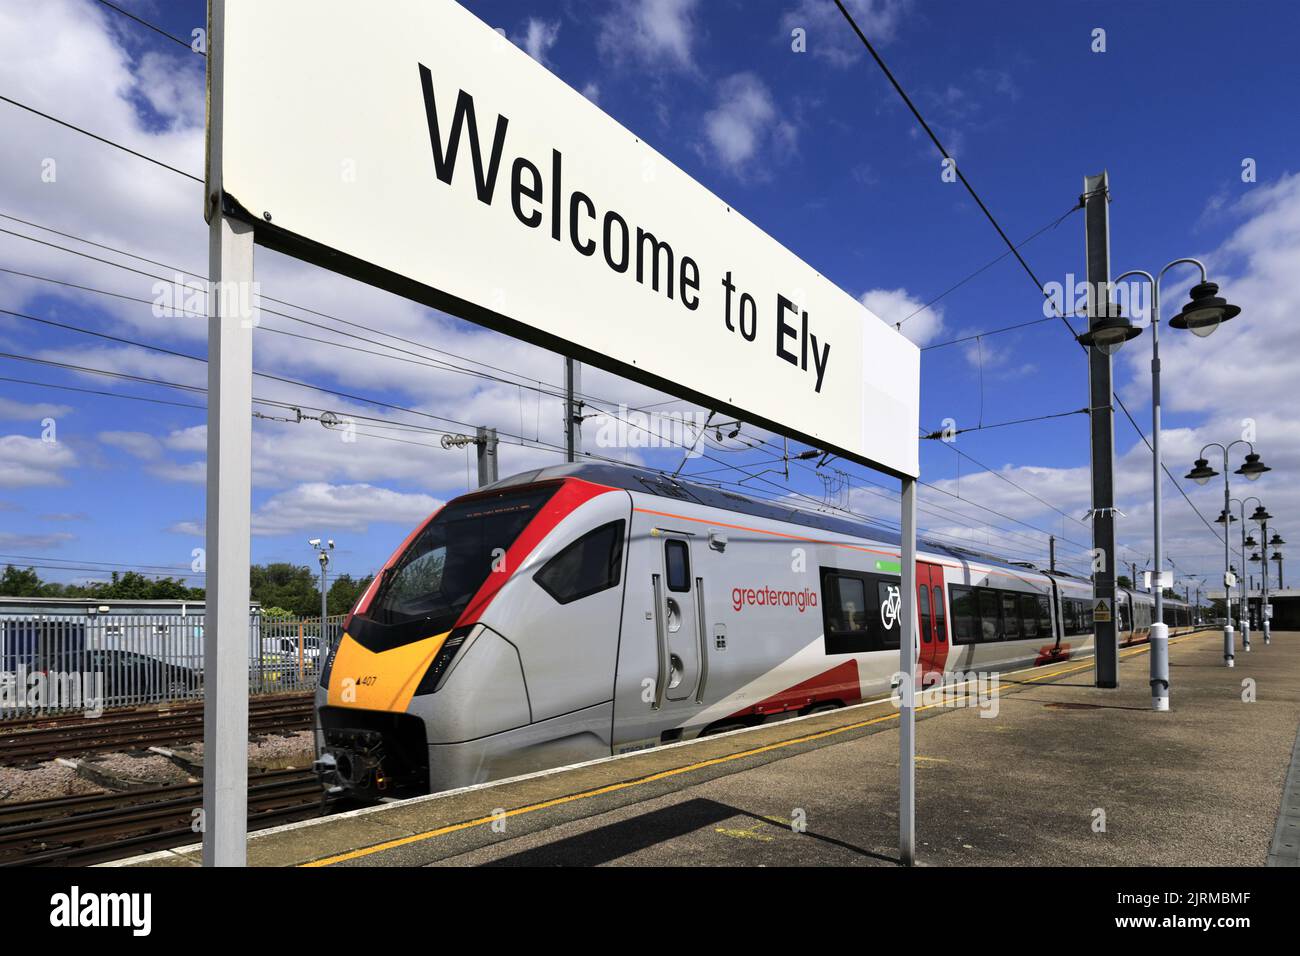 Greater Anglia trains, Class 755 train at Ely station, Ely city, Cambridgeshire, England Stock Photo